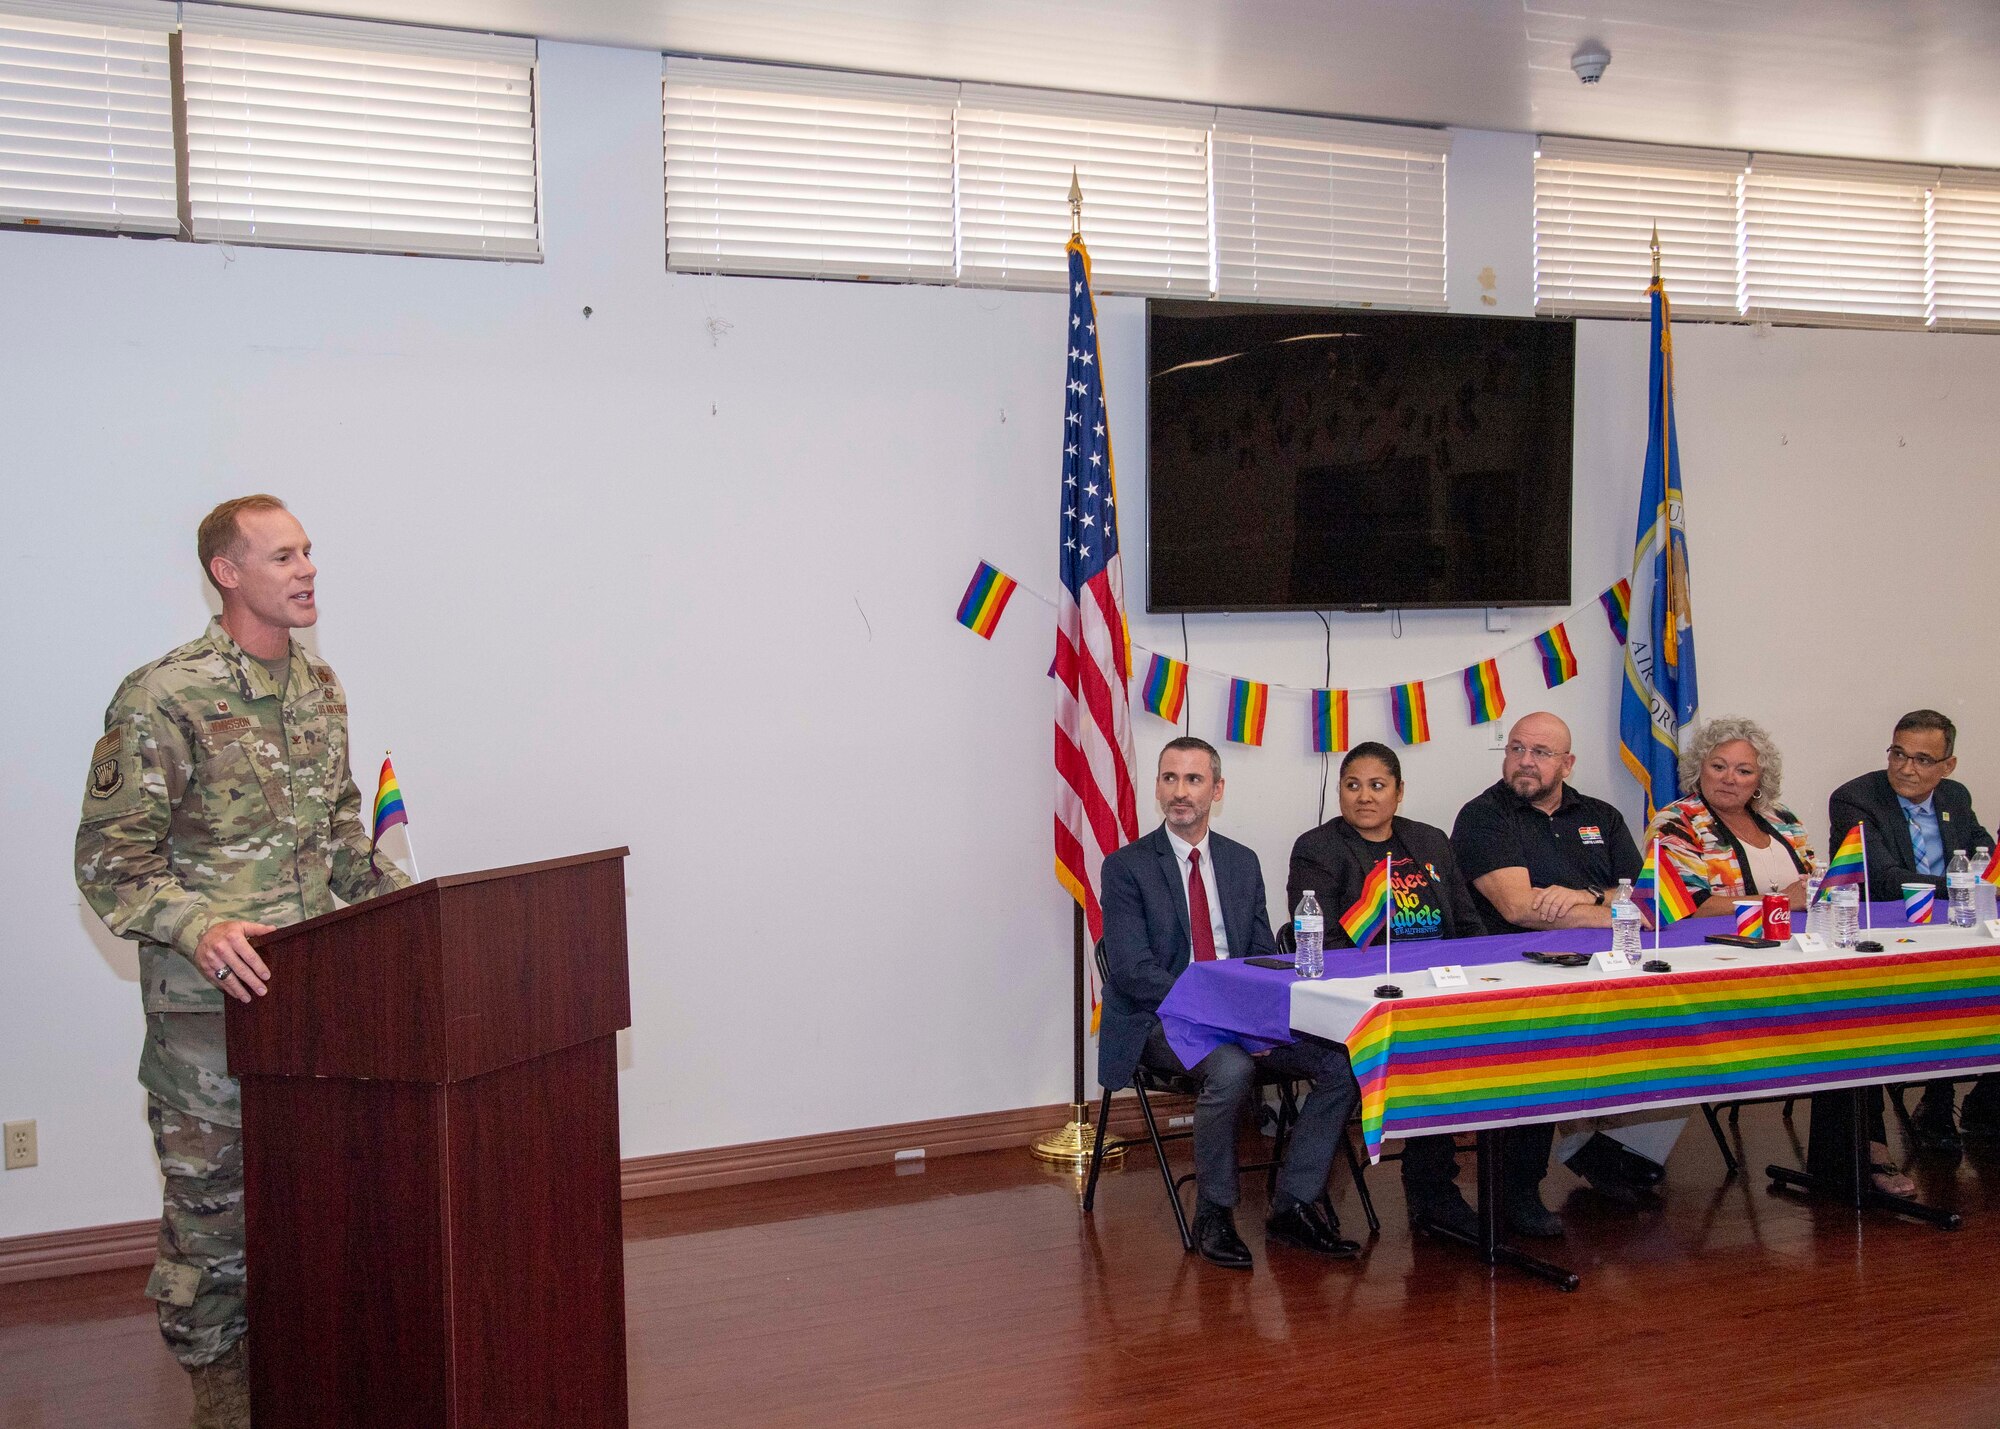 U.S. Air Force Col. Benjamin Jonsson, 6th Air Refueling Wing commander, delivers opening remarks at an LGBTQ+ Pride Month luncheon at MacDill Air Force Base, Florida, June 10, 2021.